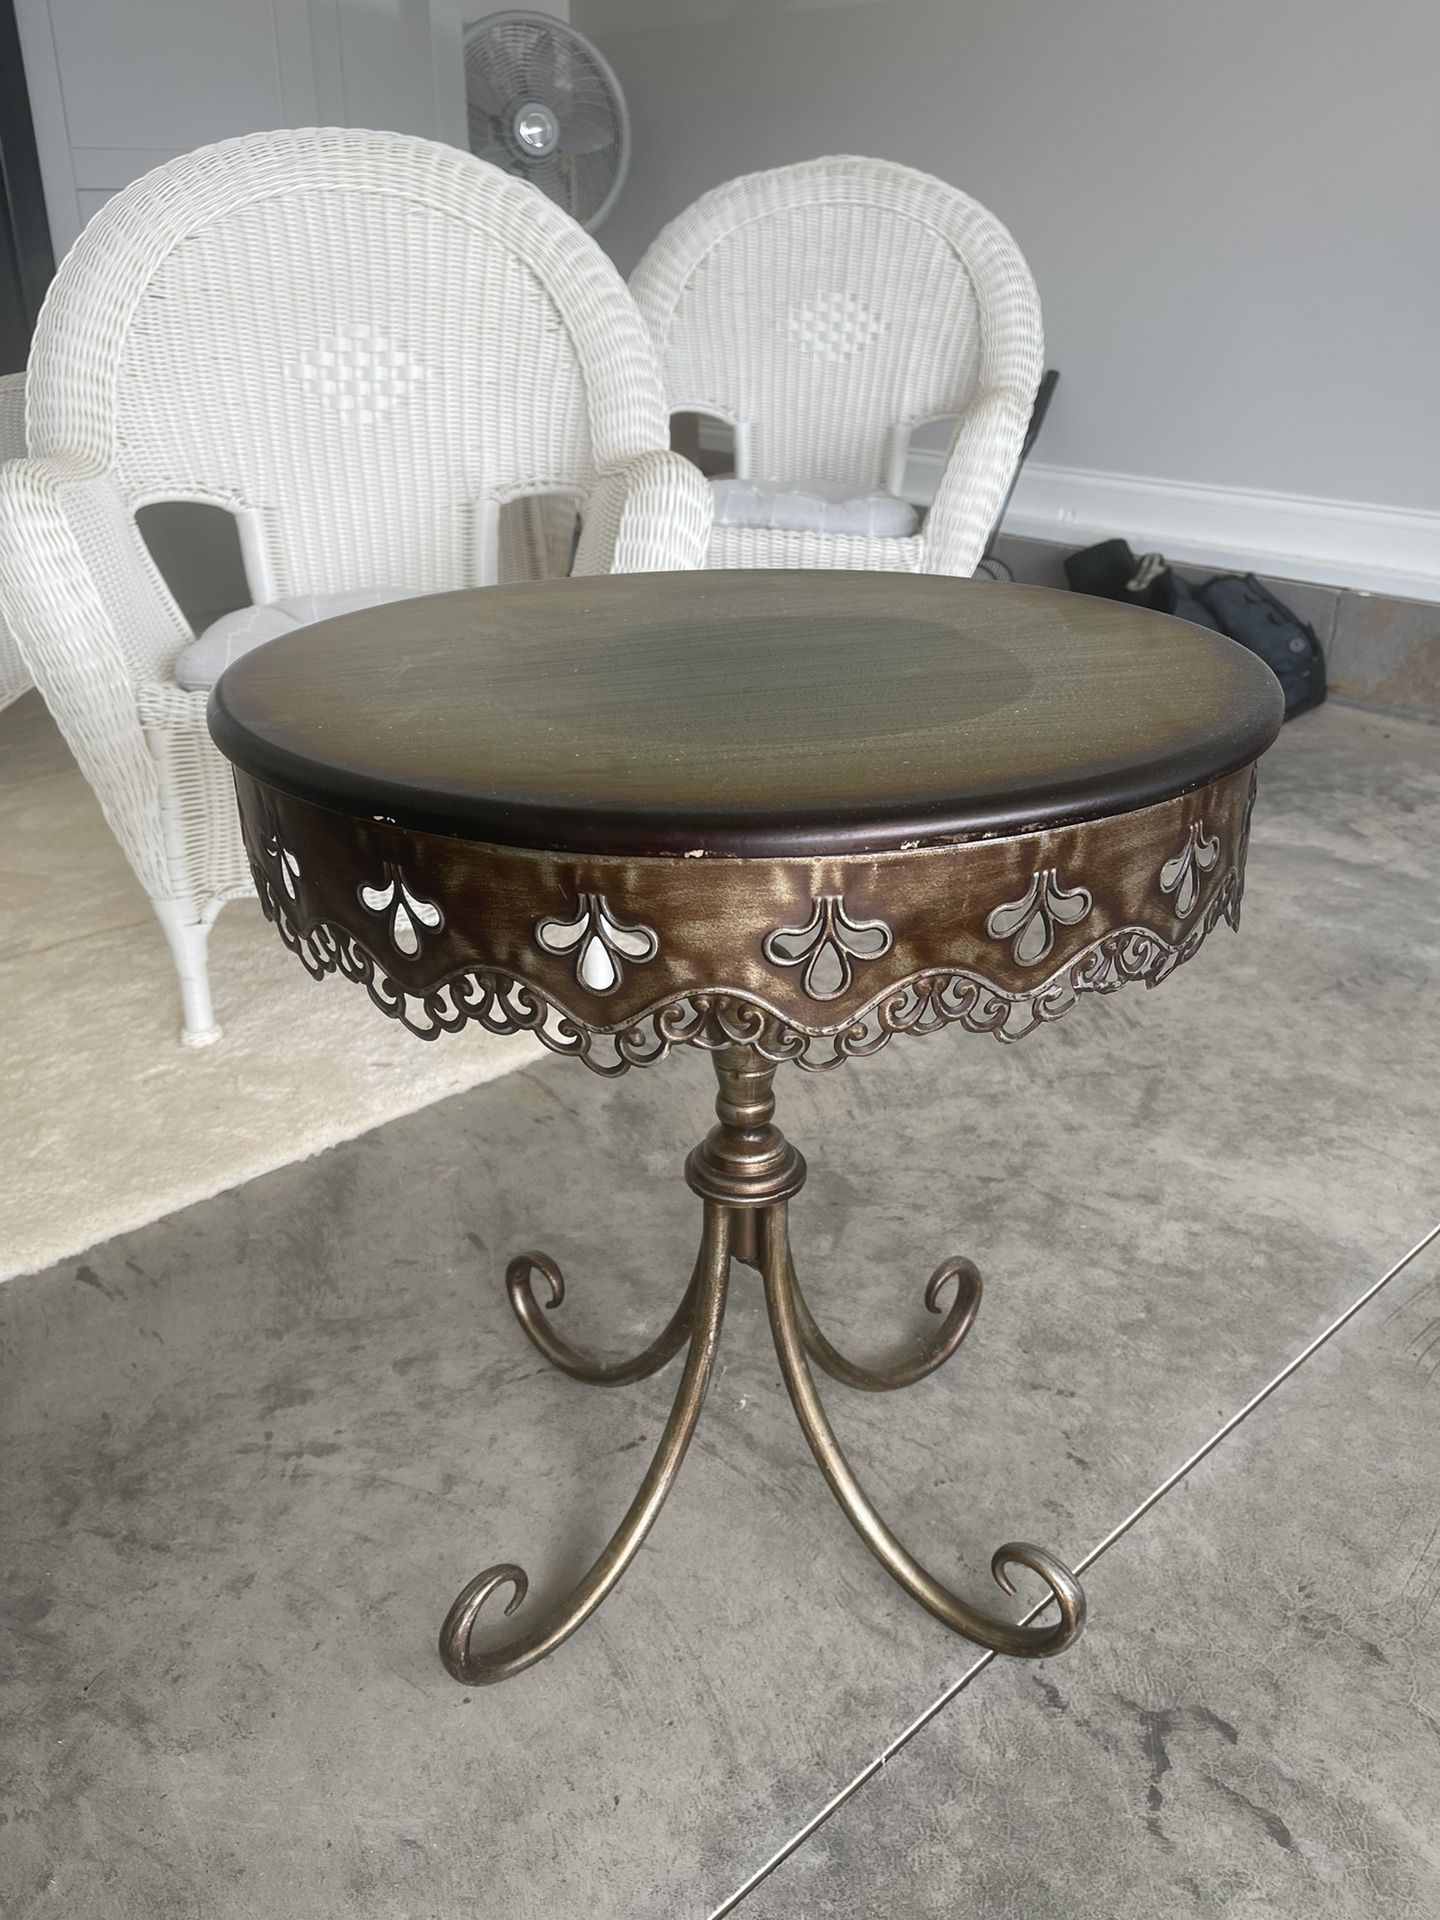 Small entry way table